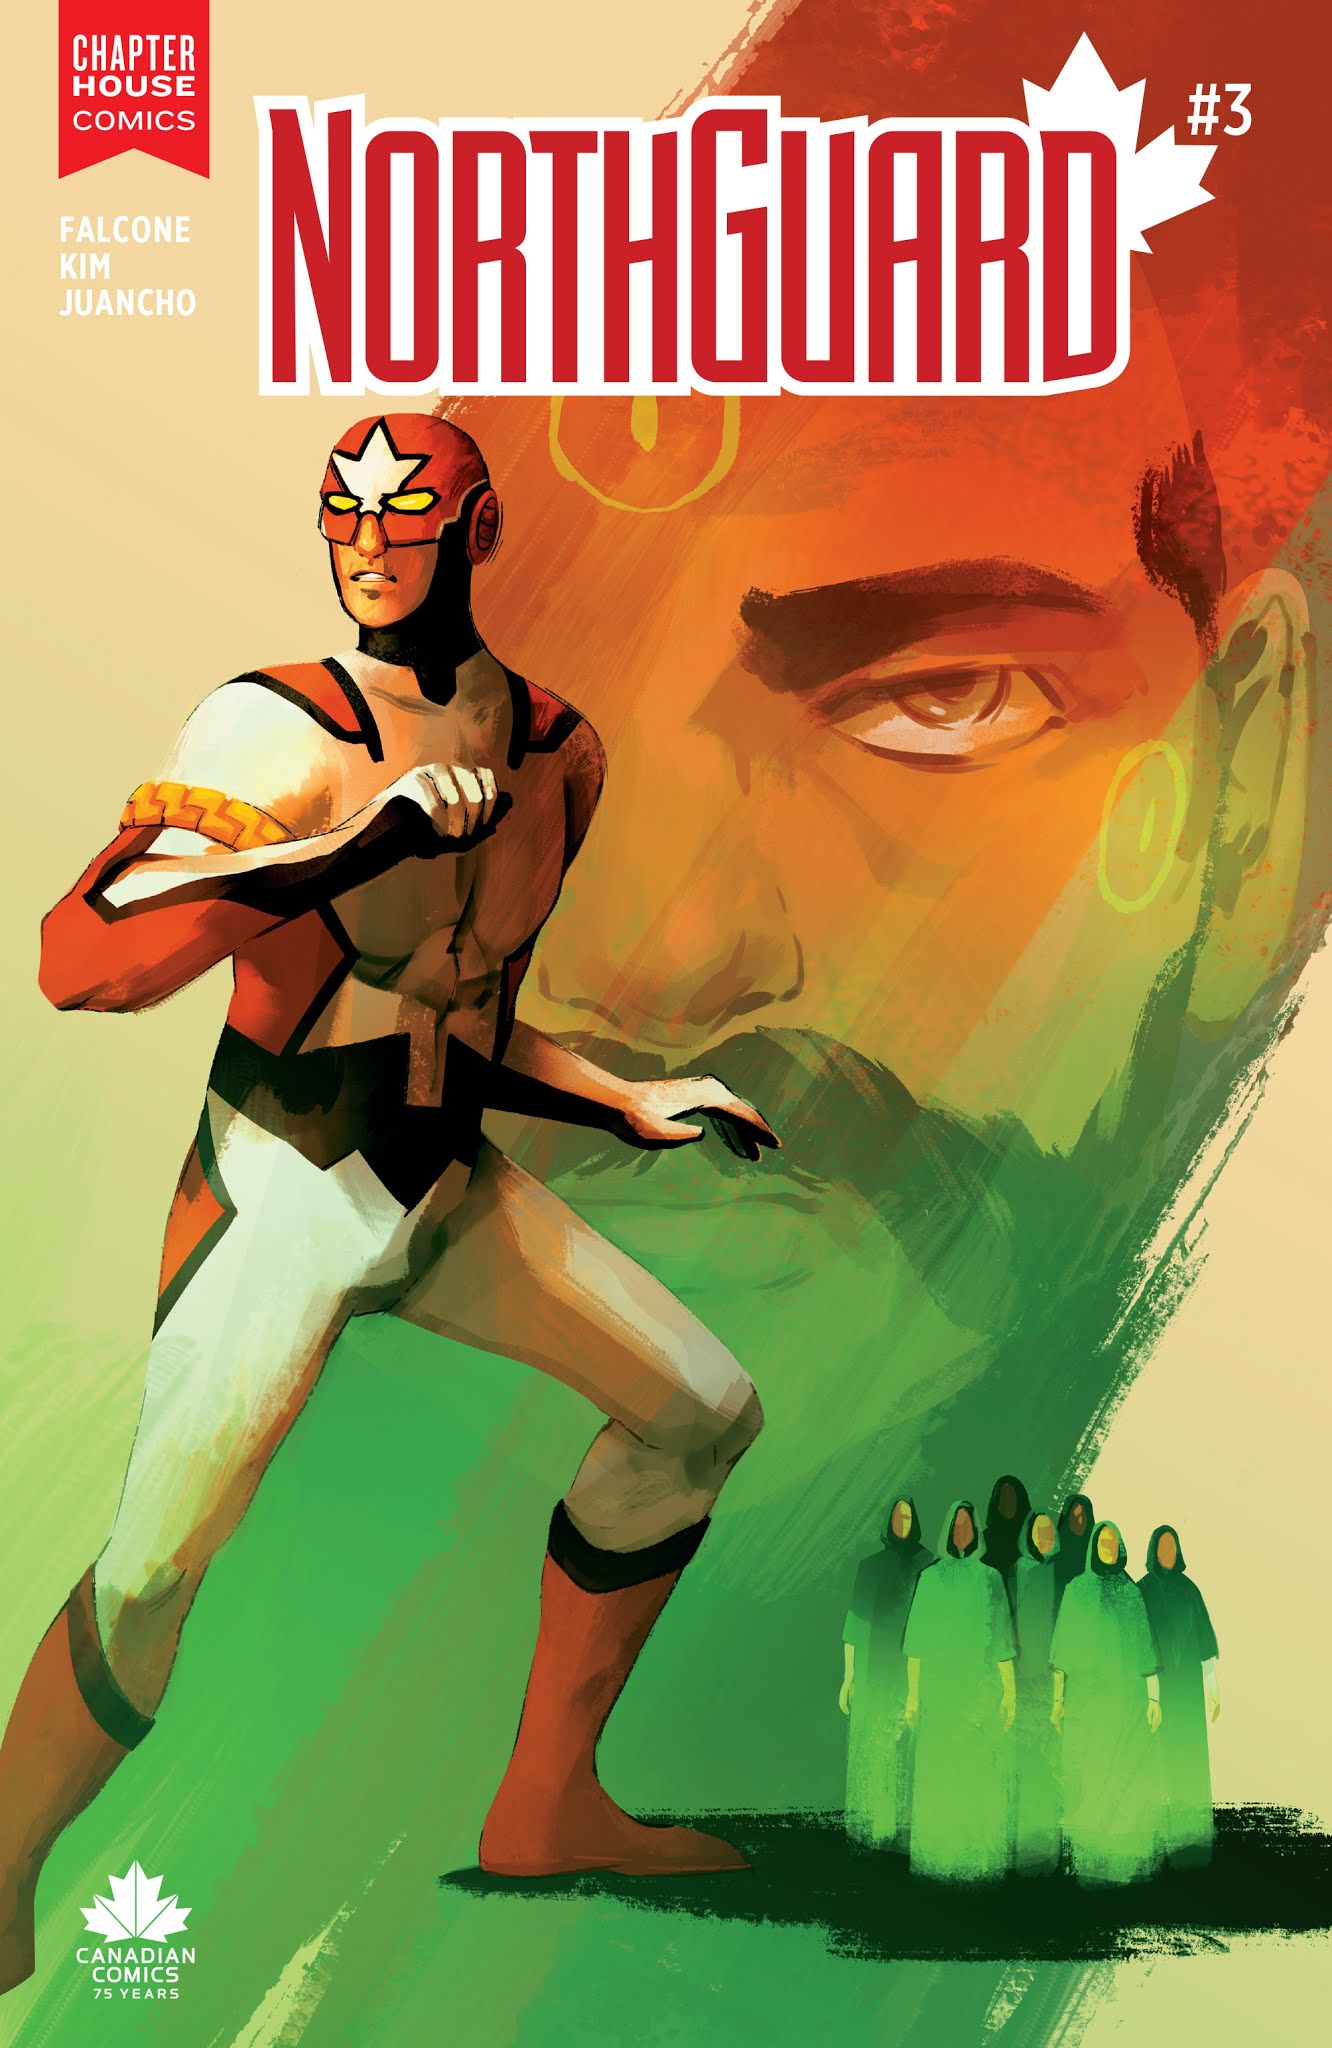 Read online Northguard comic -  Issue #3 - 2